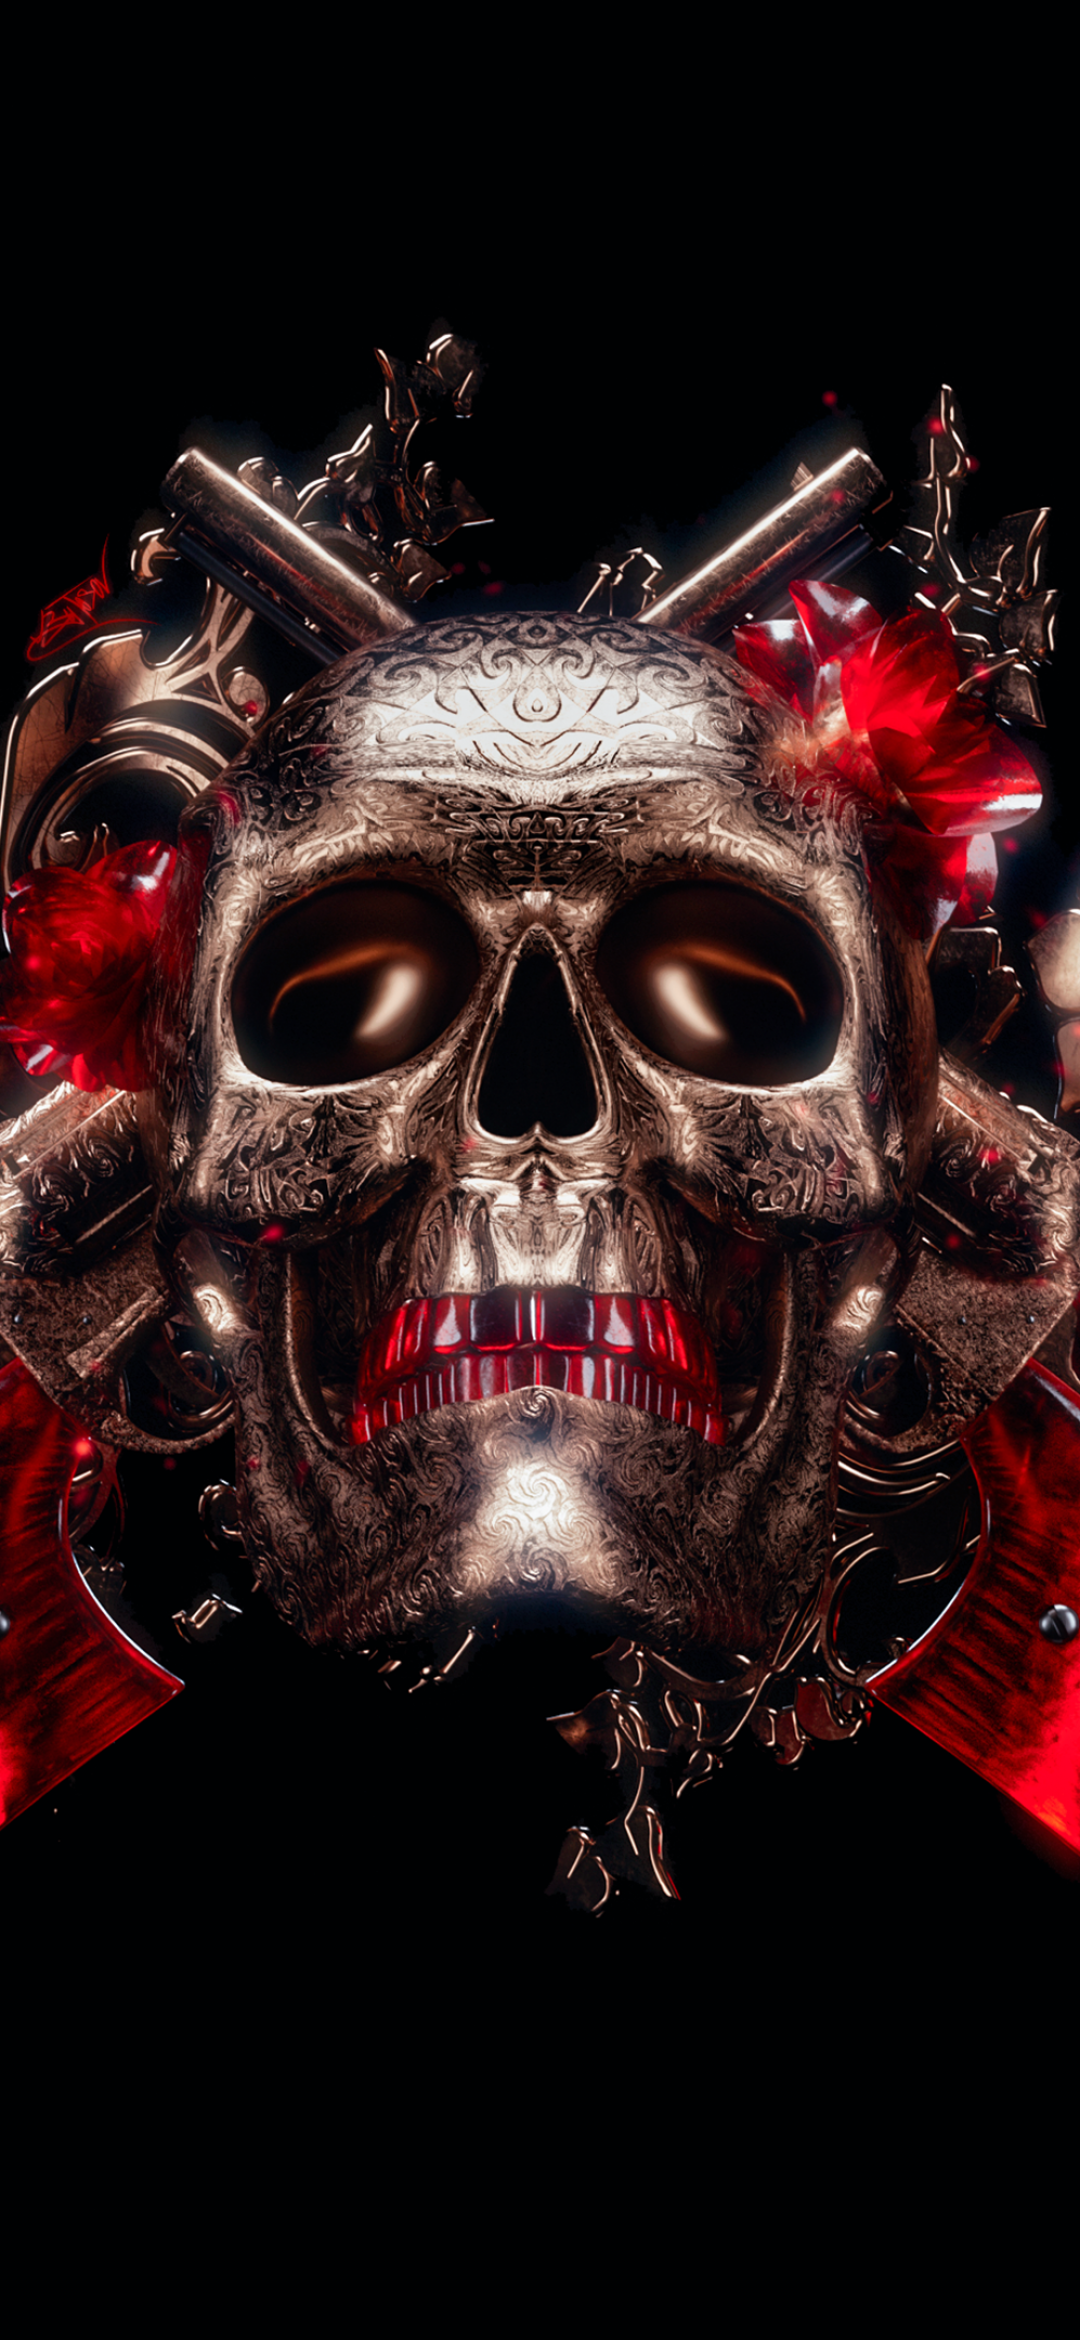 AI Art Skull Illustration with Sunglasses Wallpaper, HD Artist 4K Wallpapers,  Images and Background - Wallpapers Den